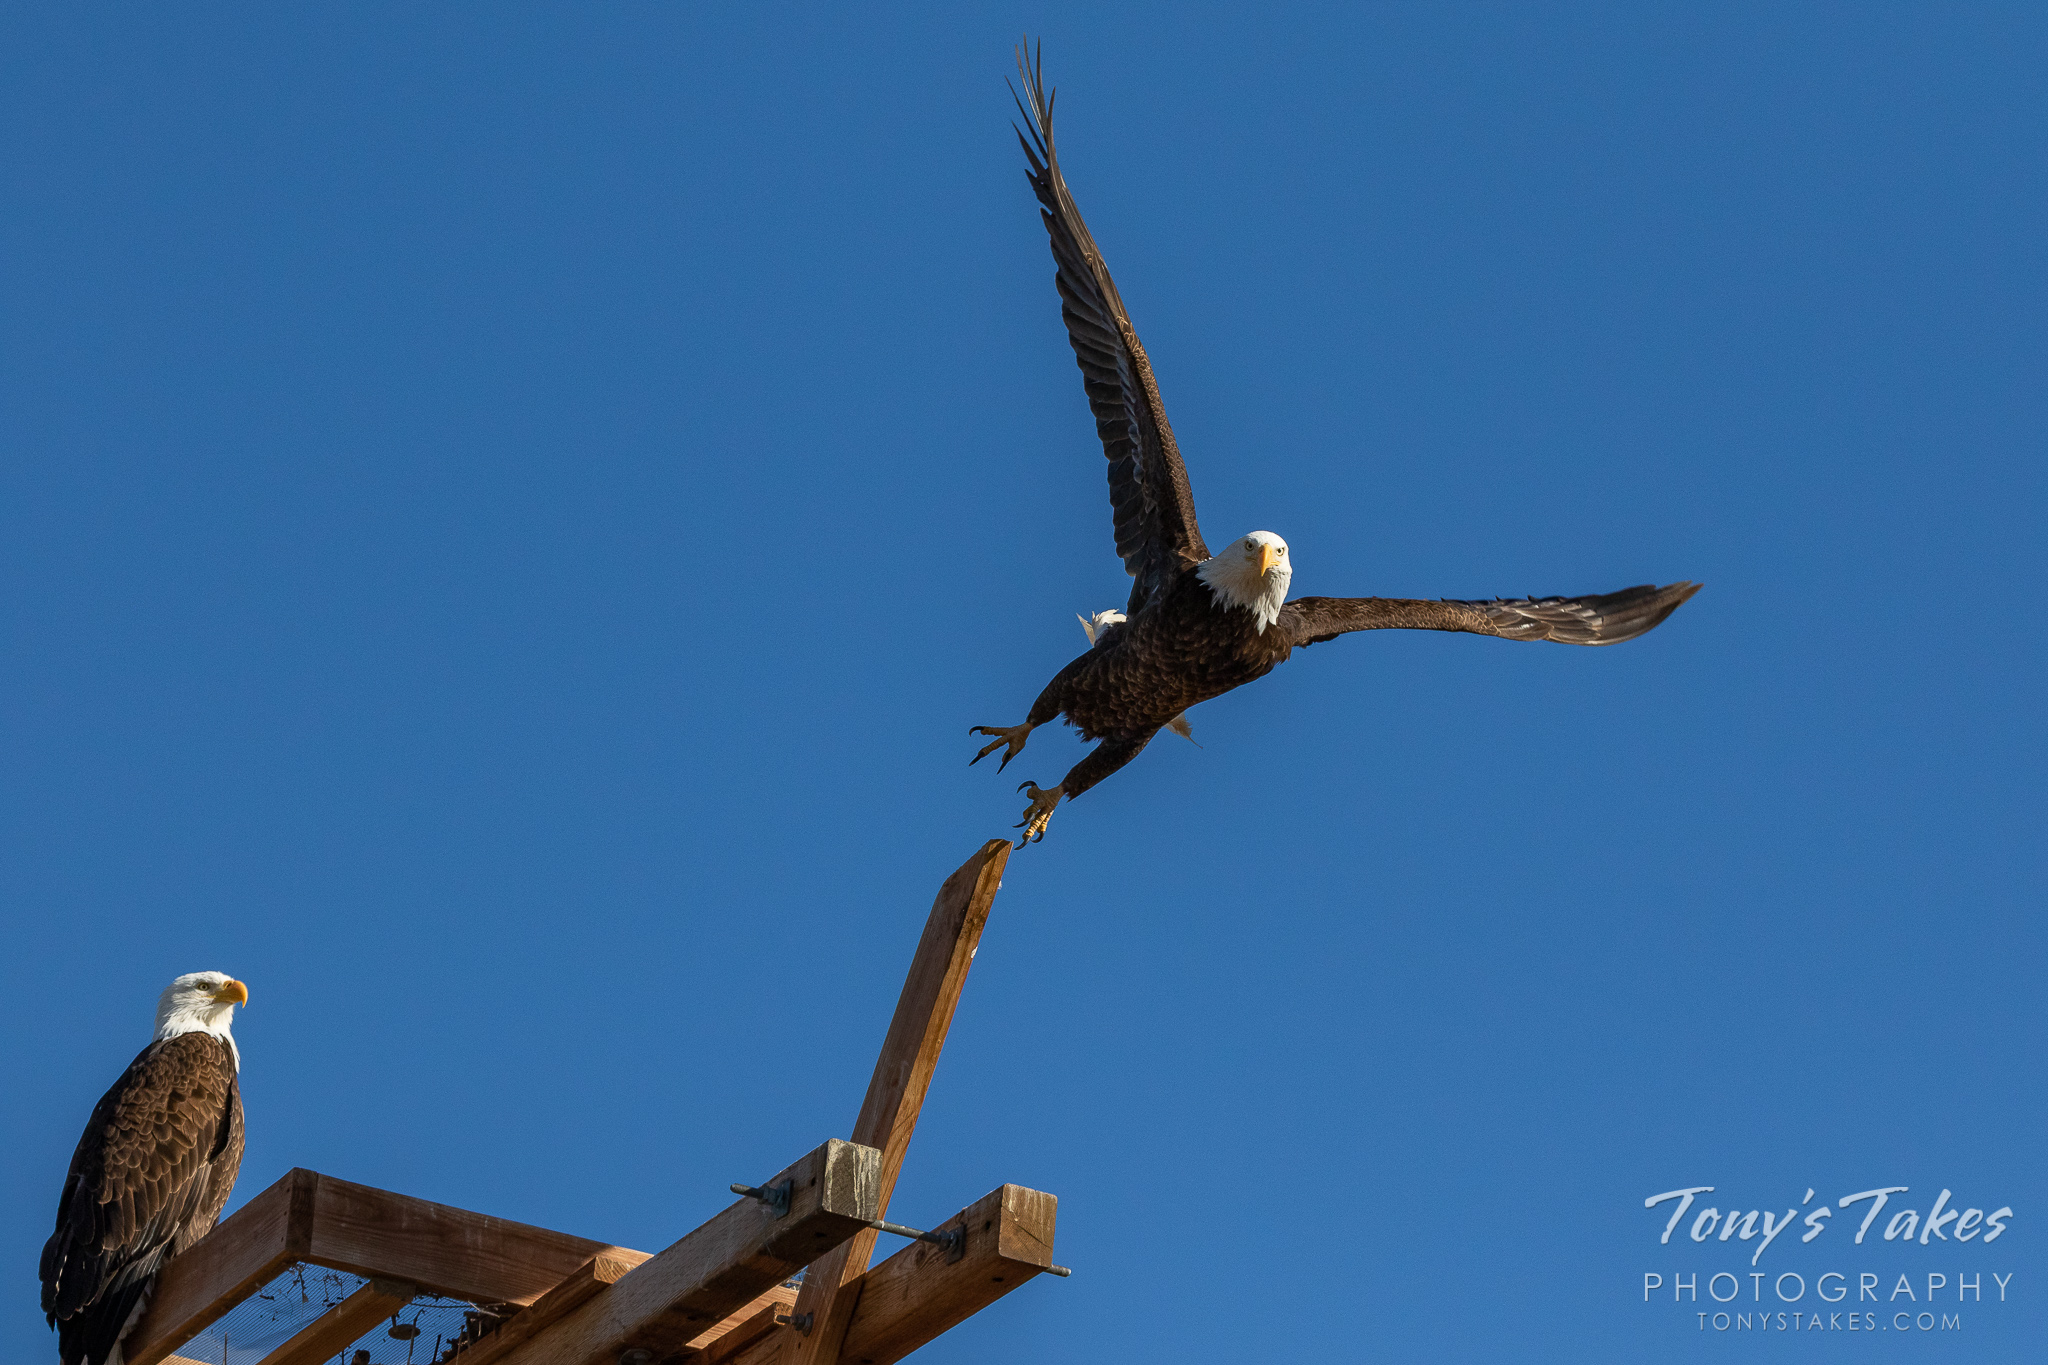 A male bald eagle launches into the sky in Weld County, Colorado while his mate looks on. (© Tony’s Takes)